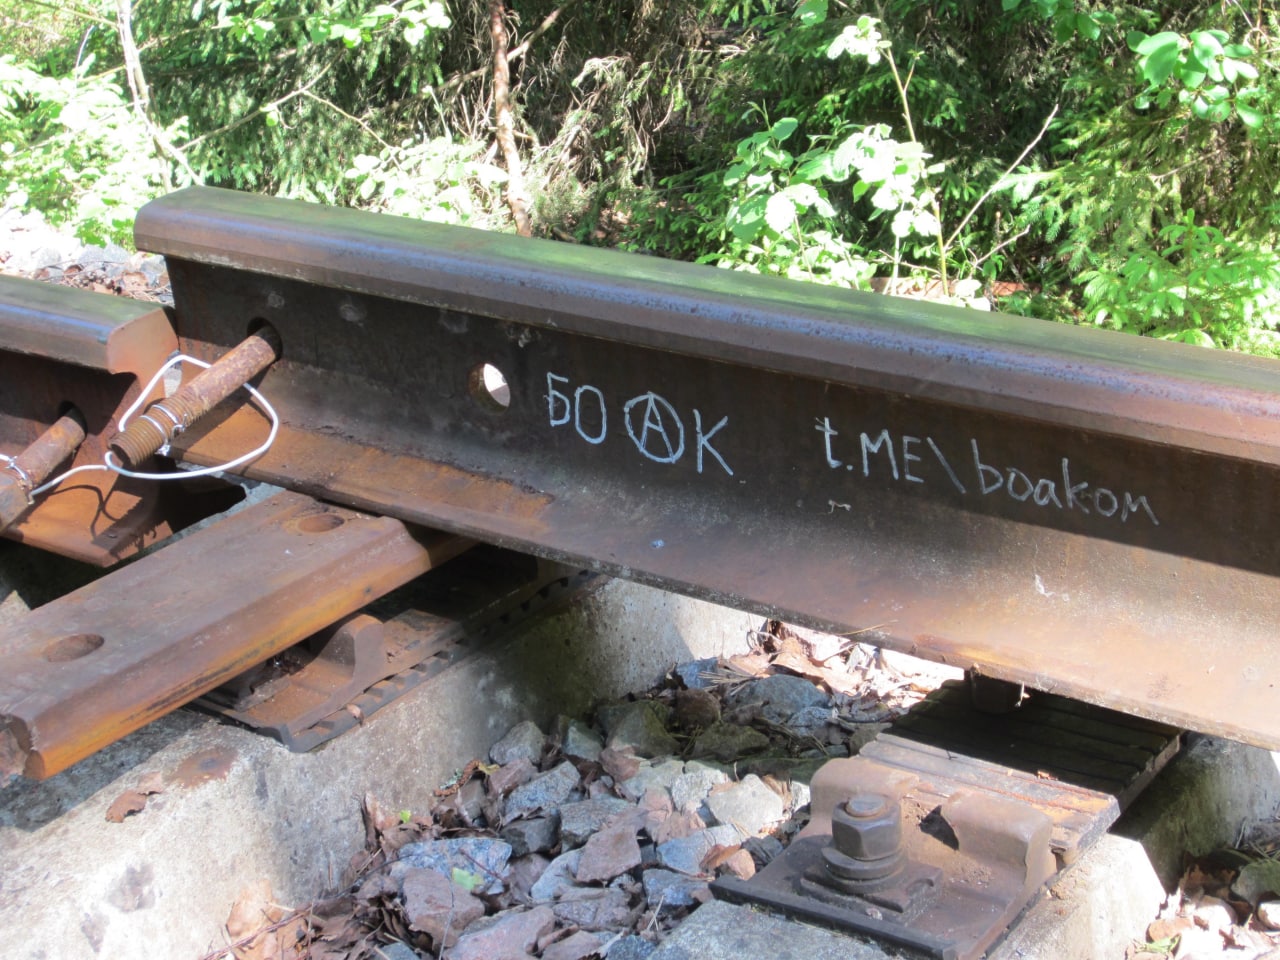 A railroad sabotage made by members from BOAK, a Russian antiwar movement